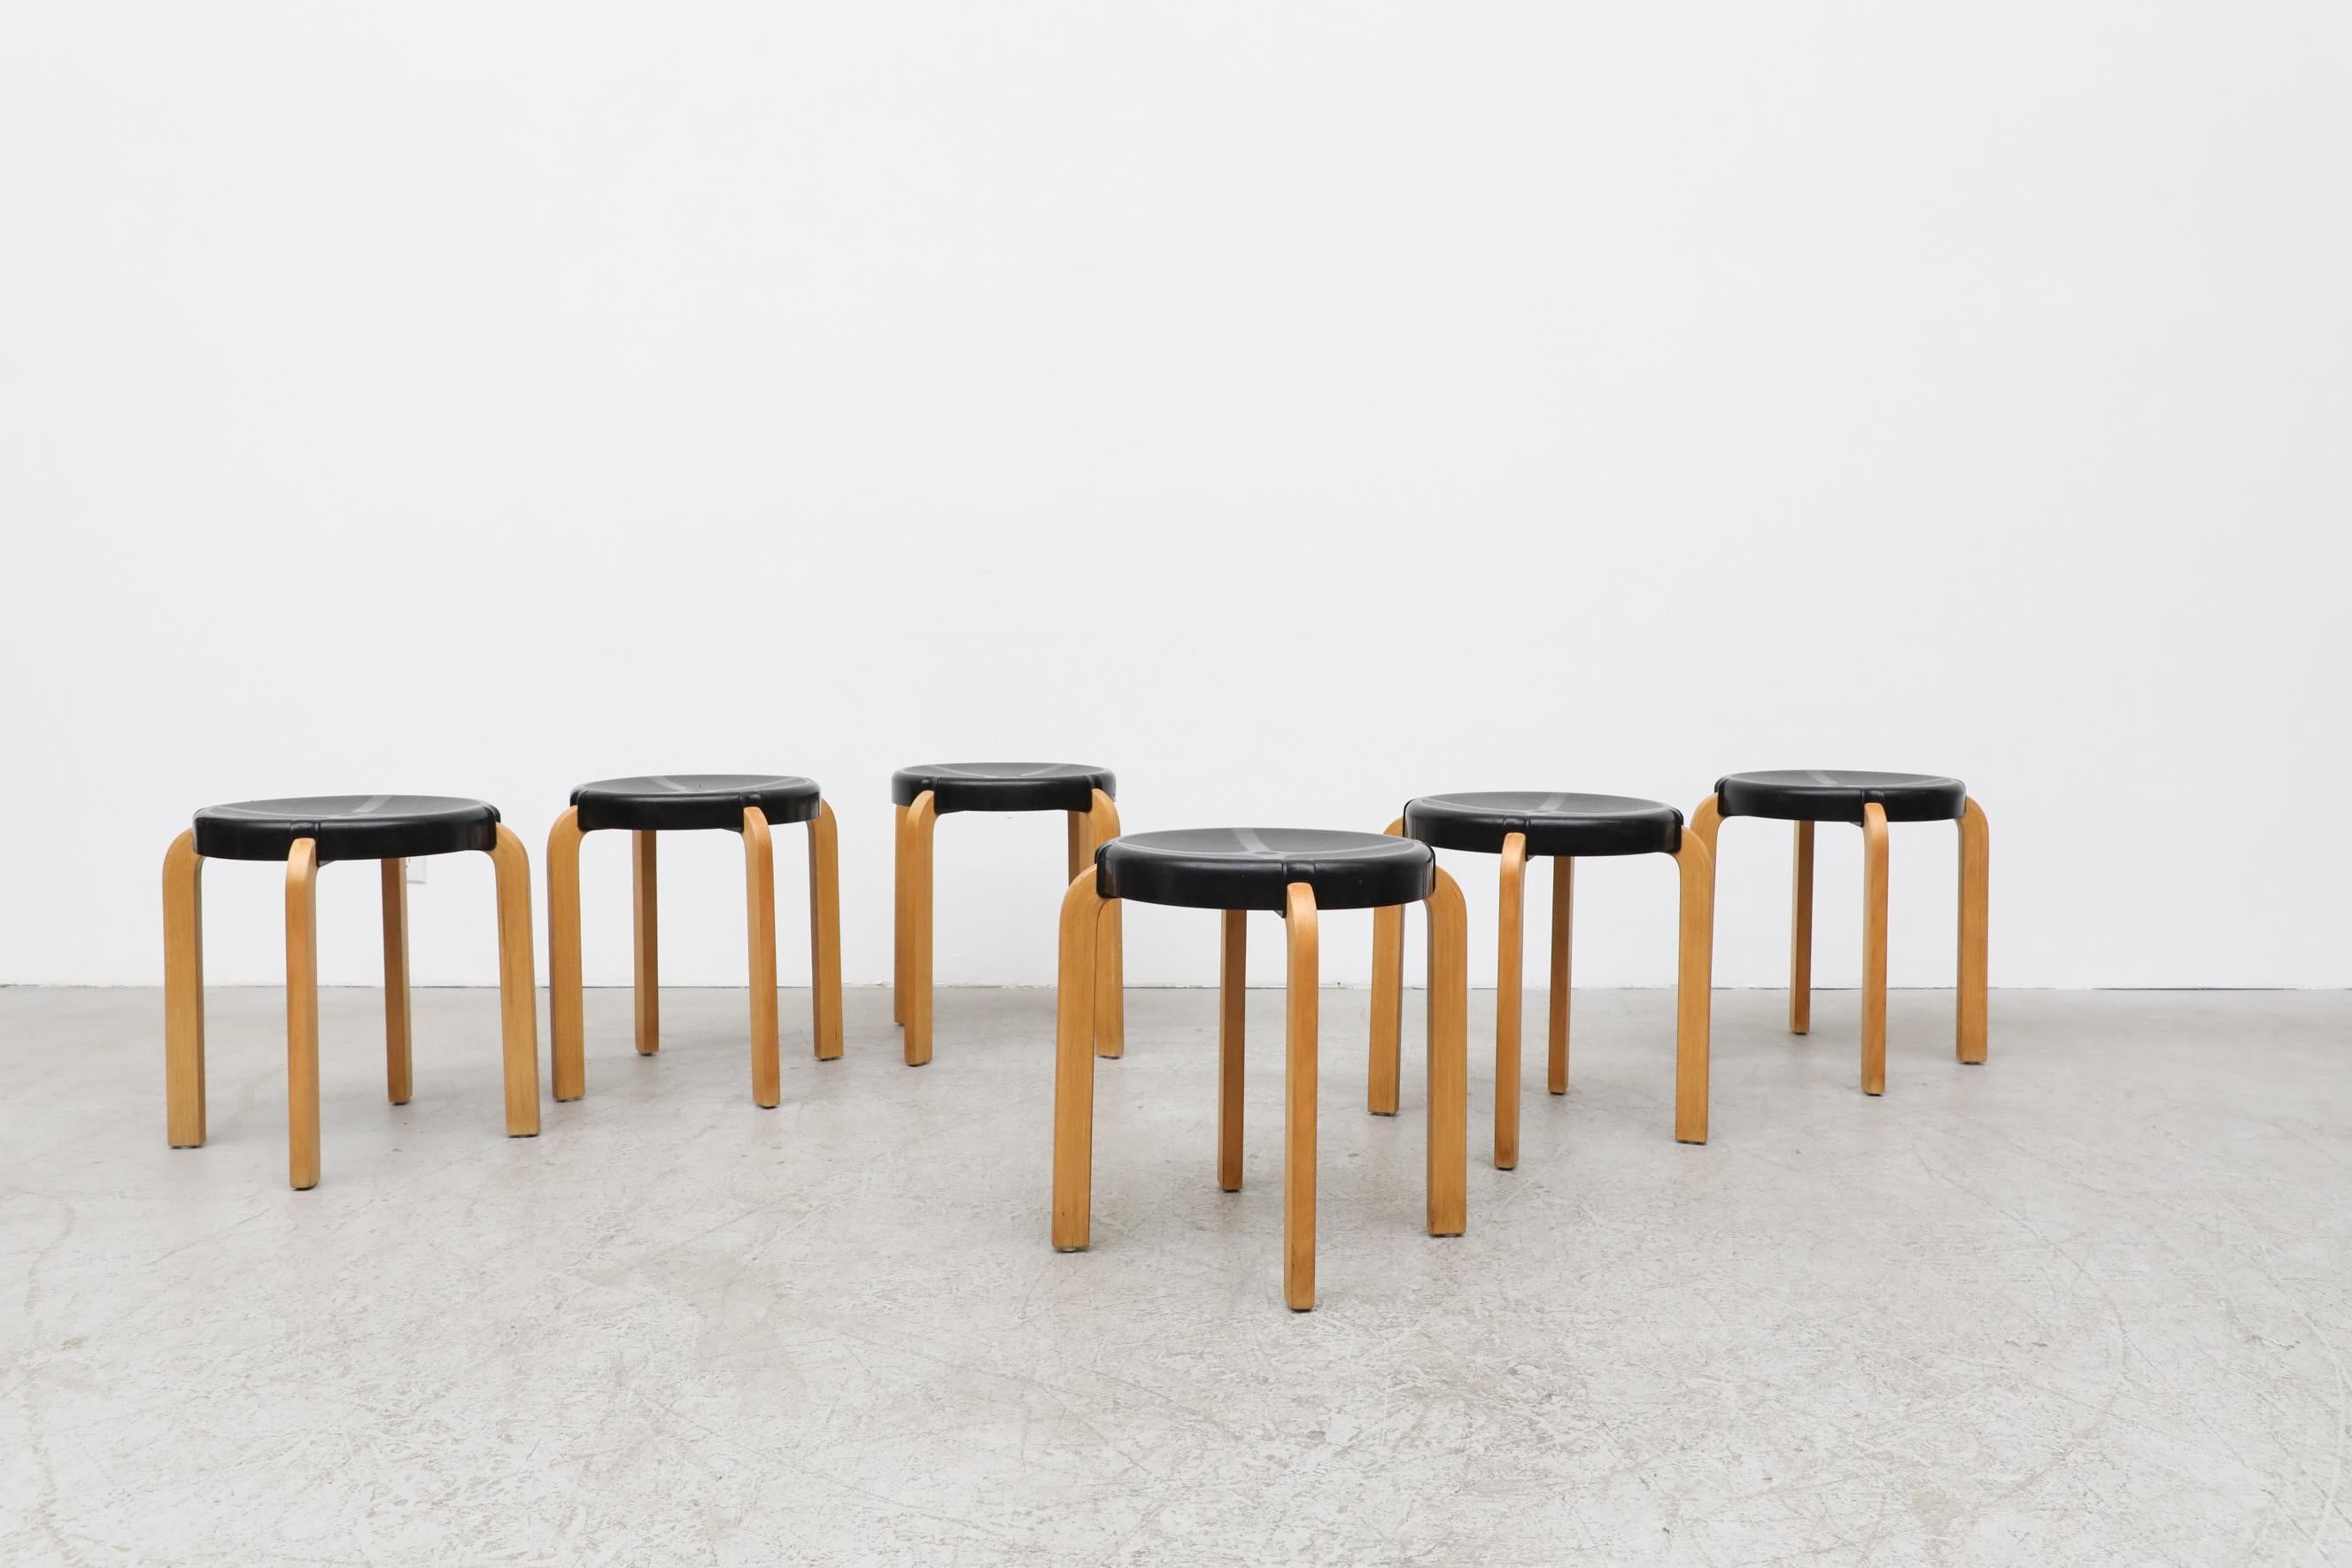 Dutch Alvar Aalto Style Stools with Acrylic Seat by Kembo